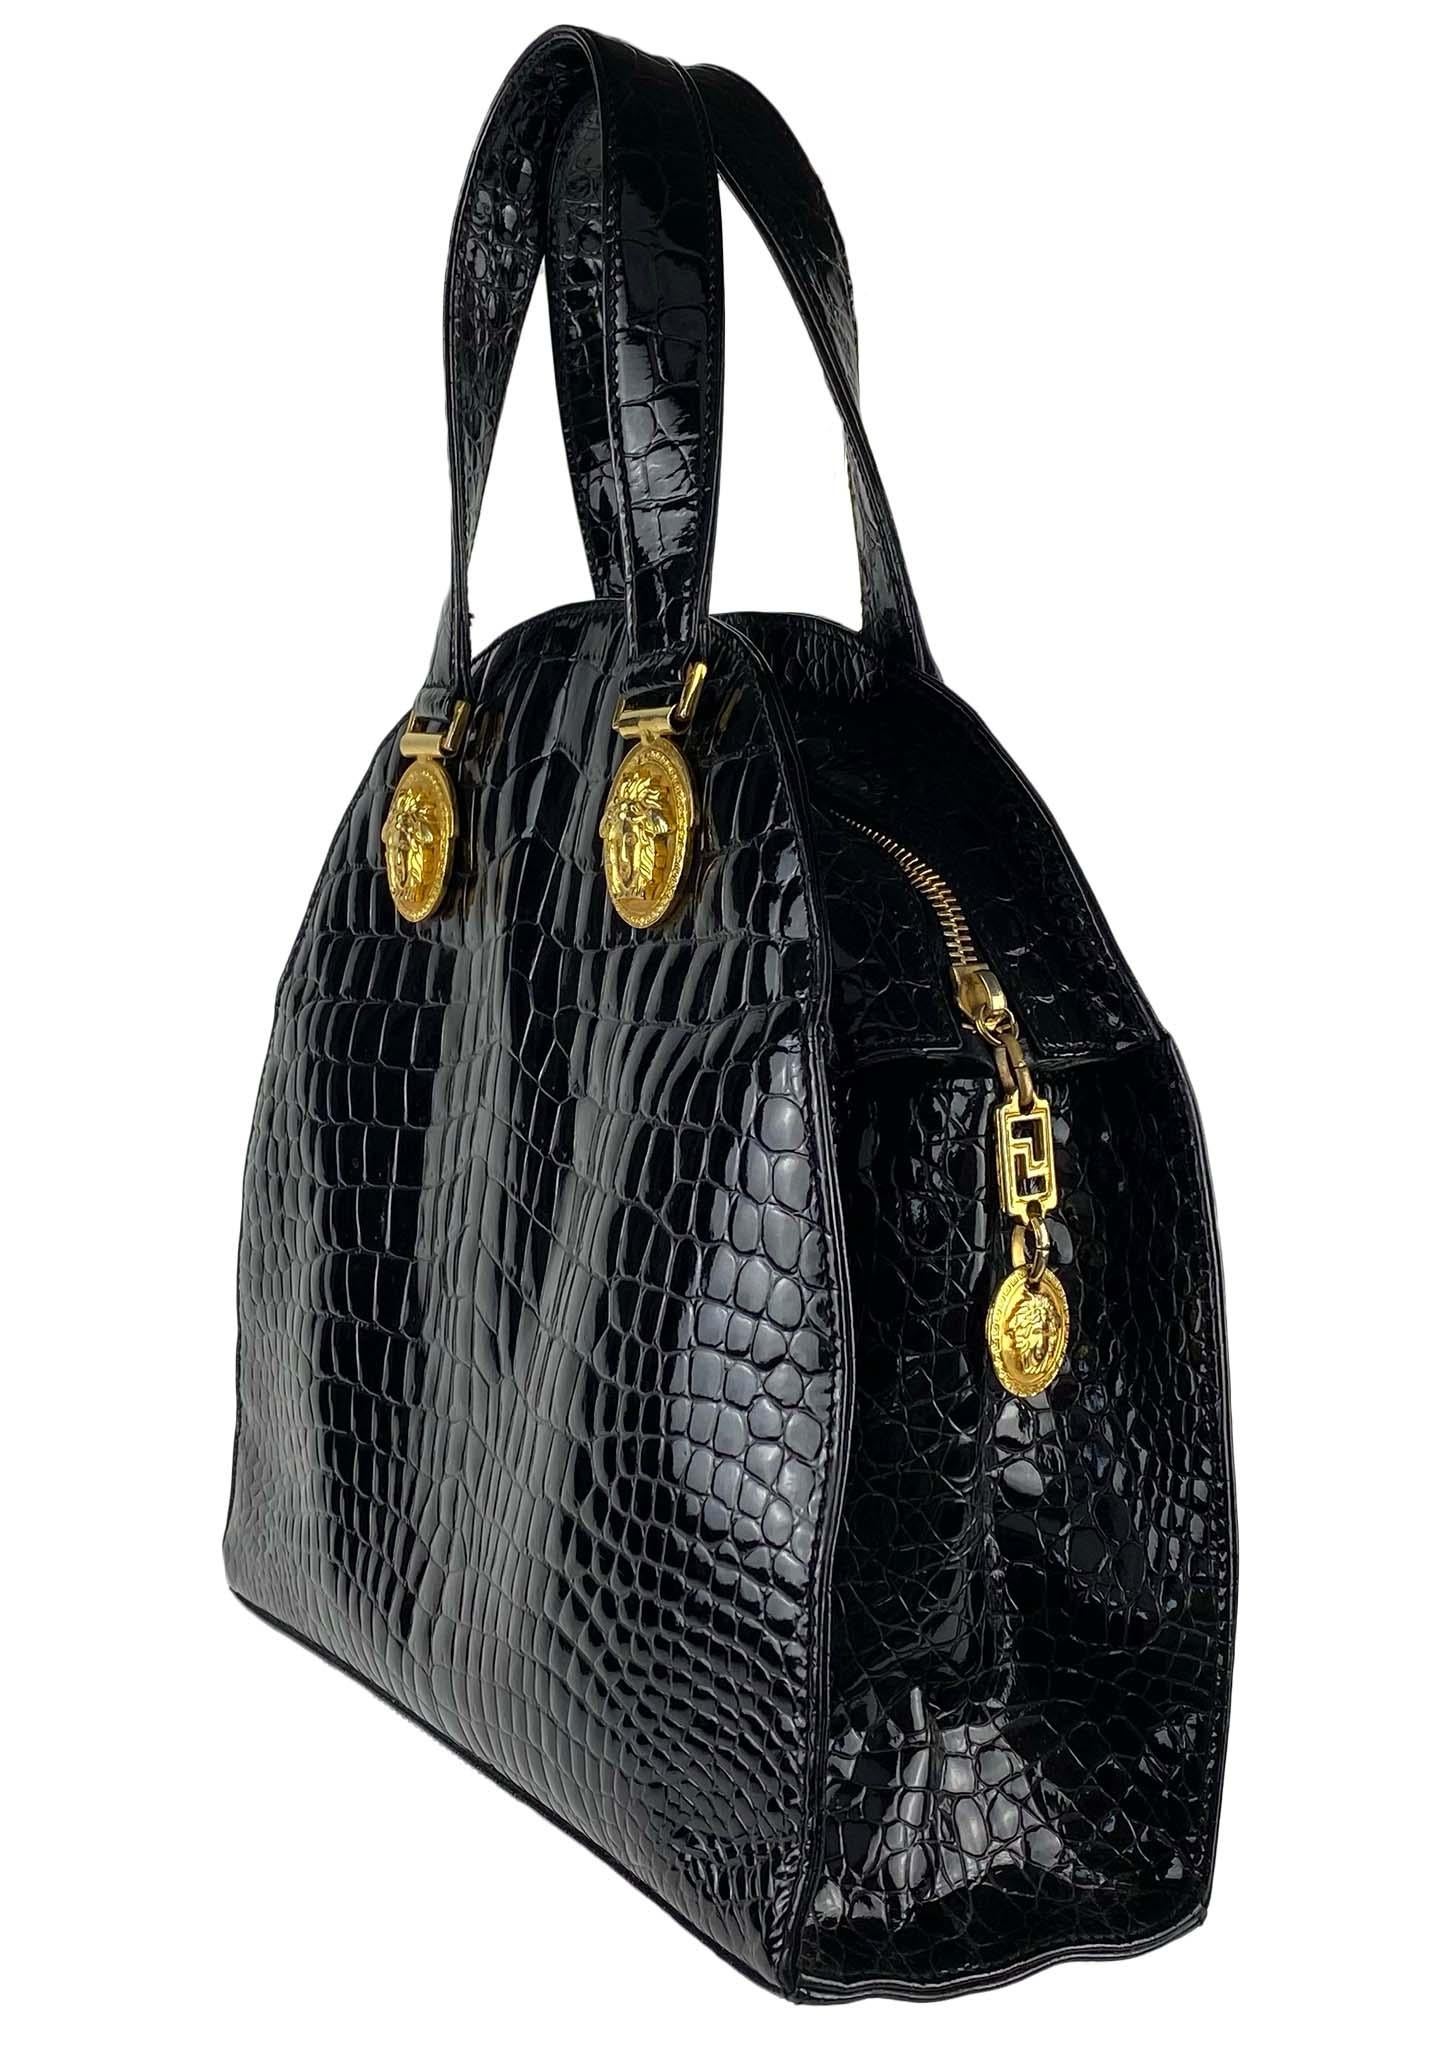 Presenting an embossed patent leather dome bag by Gianni Versace. This piece was released as part of Versace's iconic 'Miss S&M' F/W 1992 collection, famous for its bondage-inspired designs. Truly a power bag, this piece is sure to turn heads with